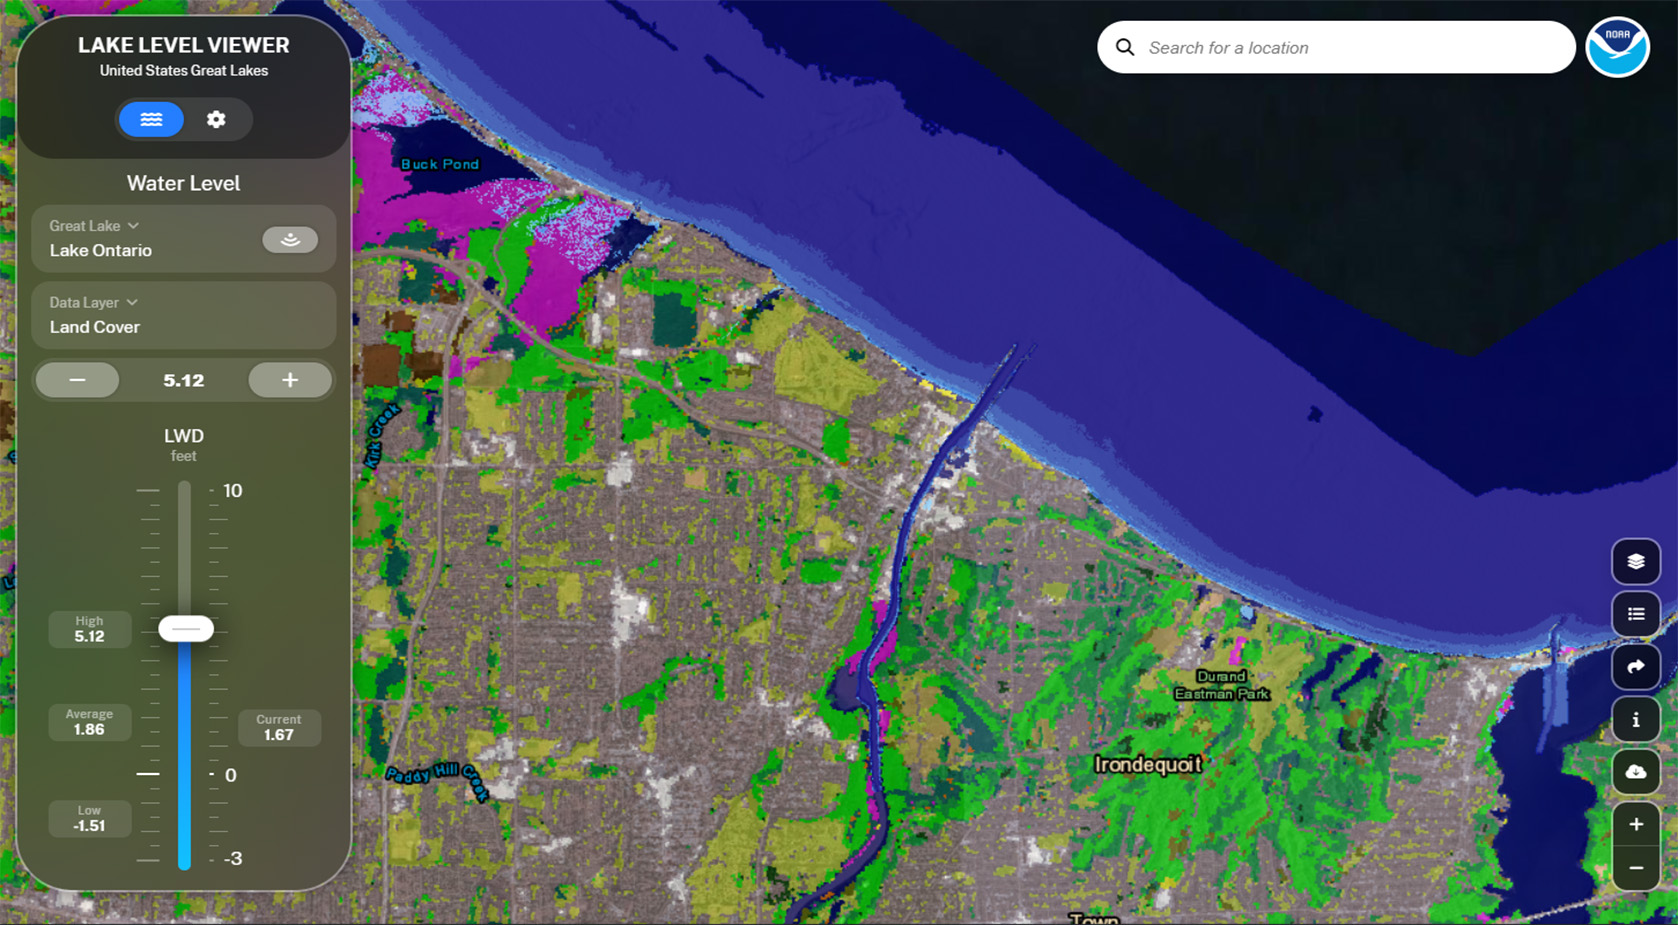 A screenshot of the tool, Lake Level Viewer (U.S. Great Lakes), being used.